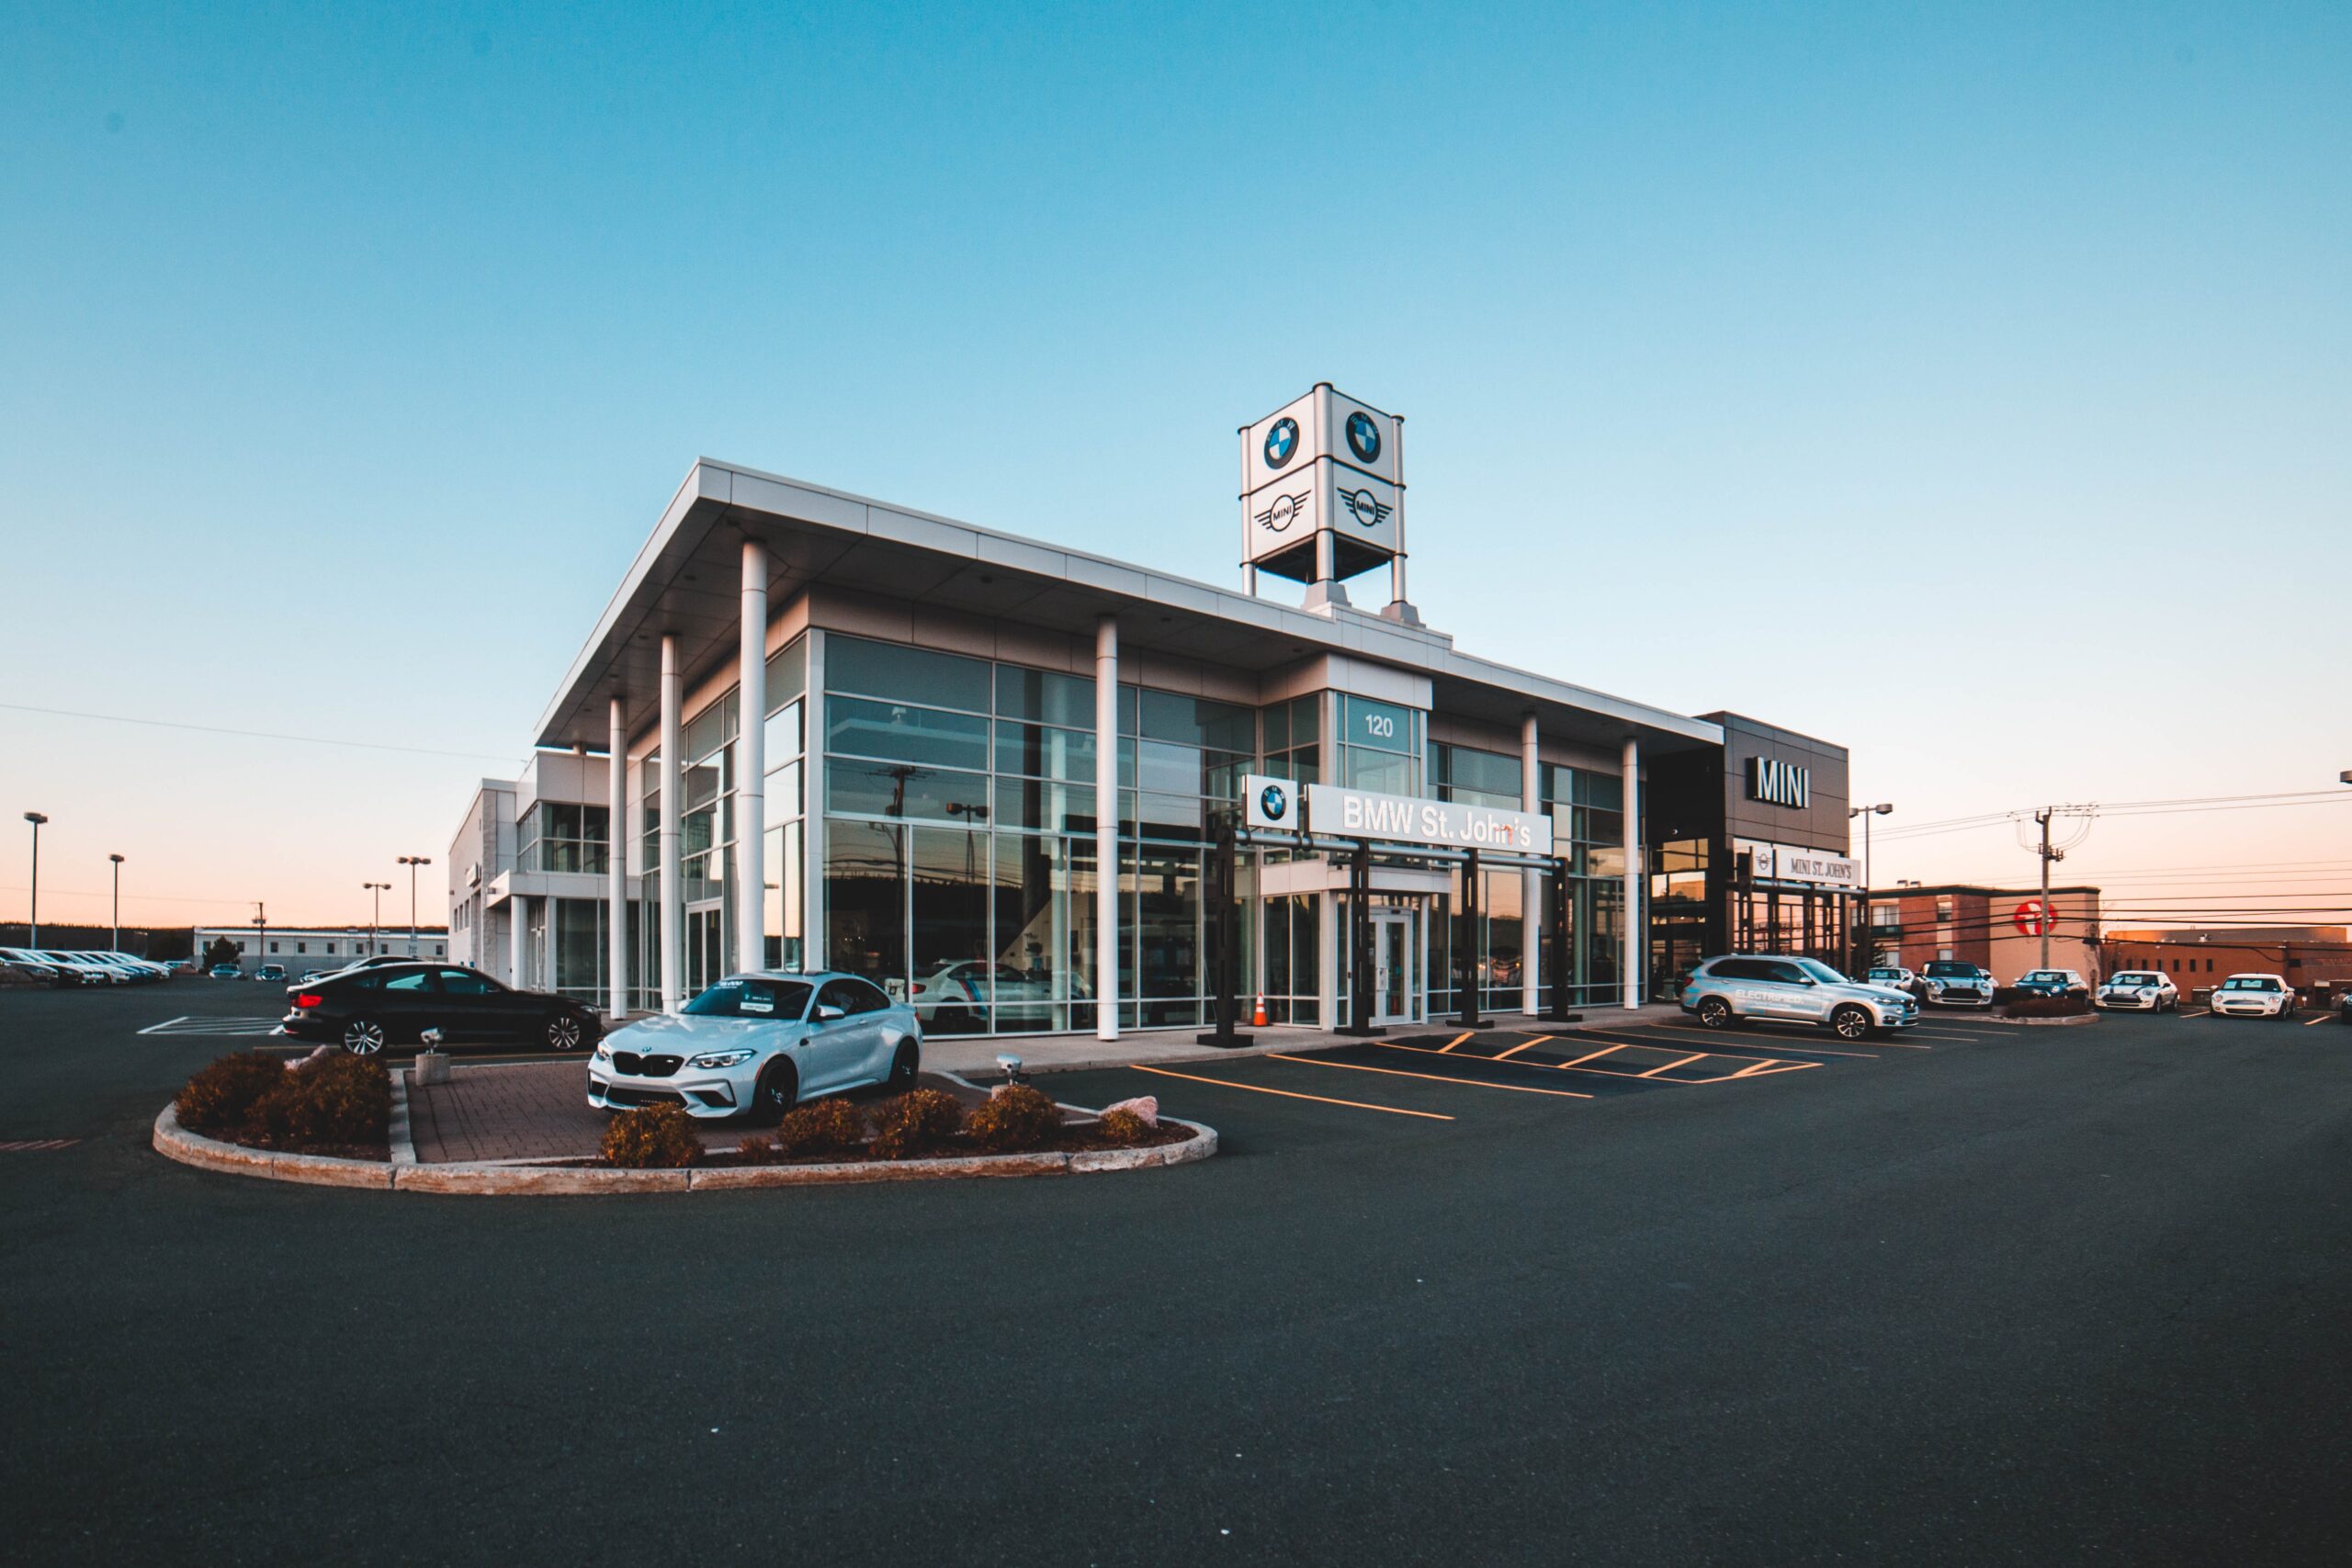 Maryland Single Family Office Acquired Car Dealerships for $90.5M